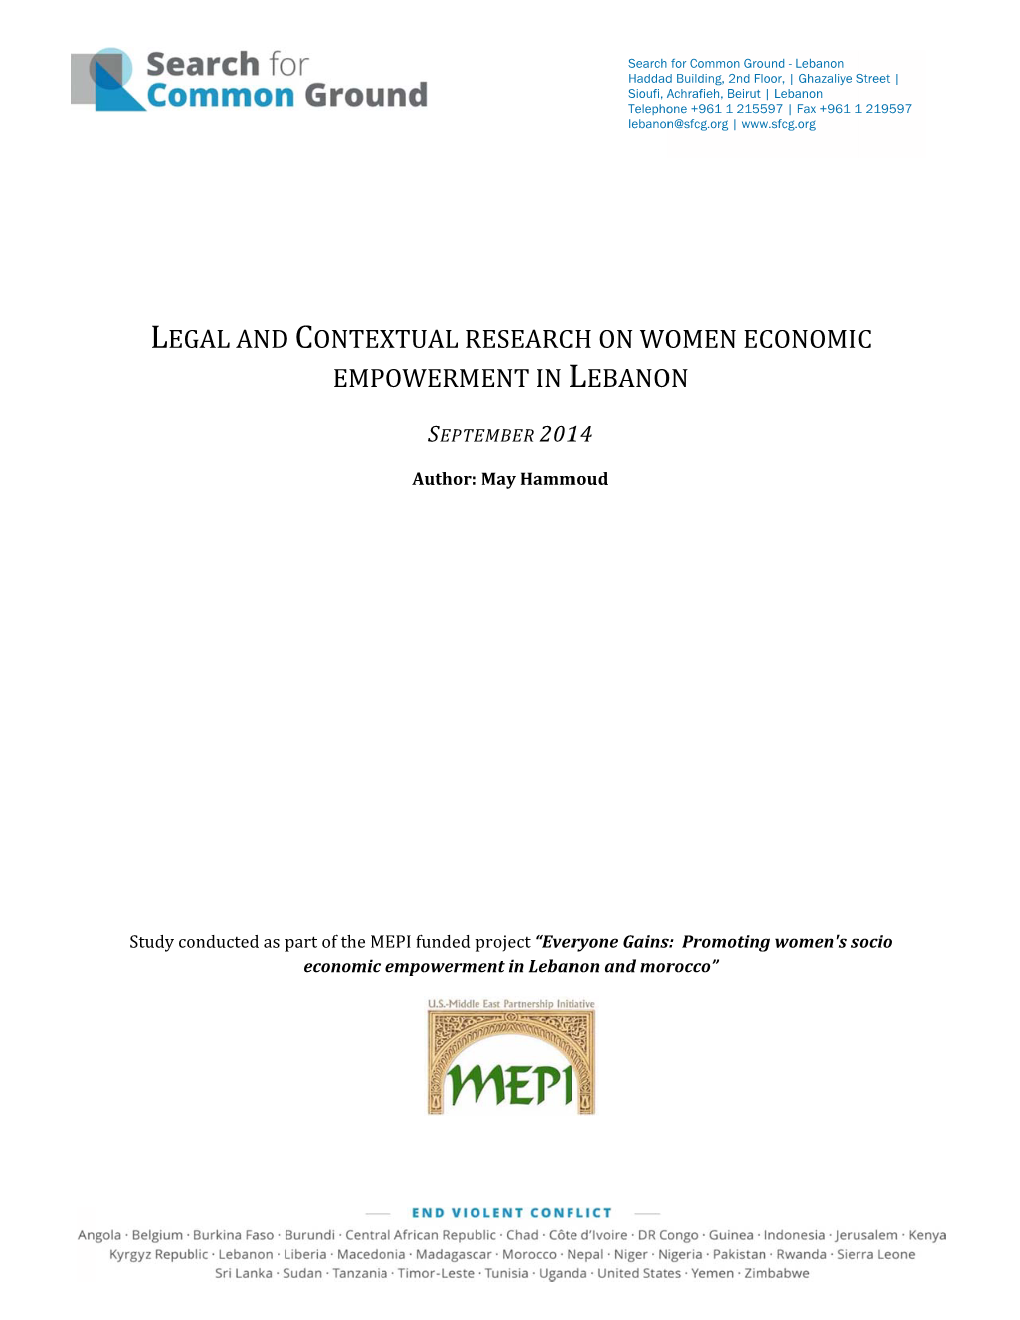 Legal and Contextual Research on Women Economic Empowerment in Lebanon